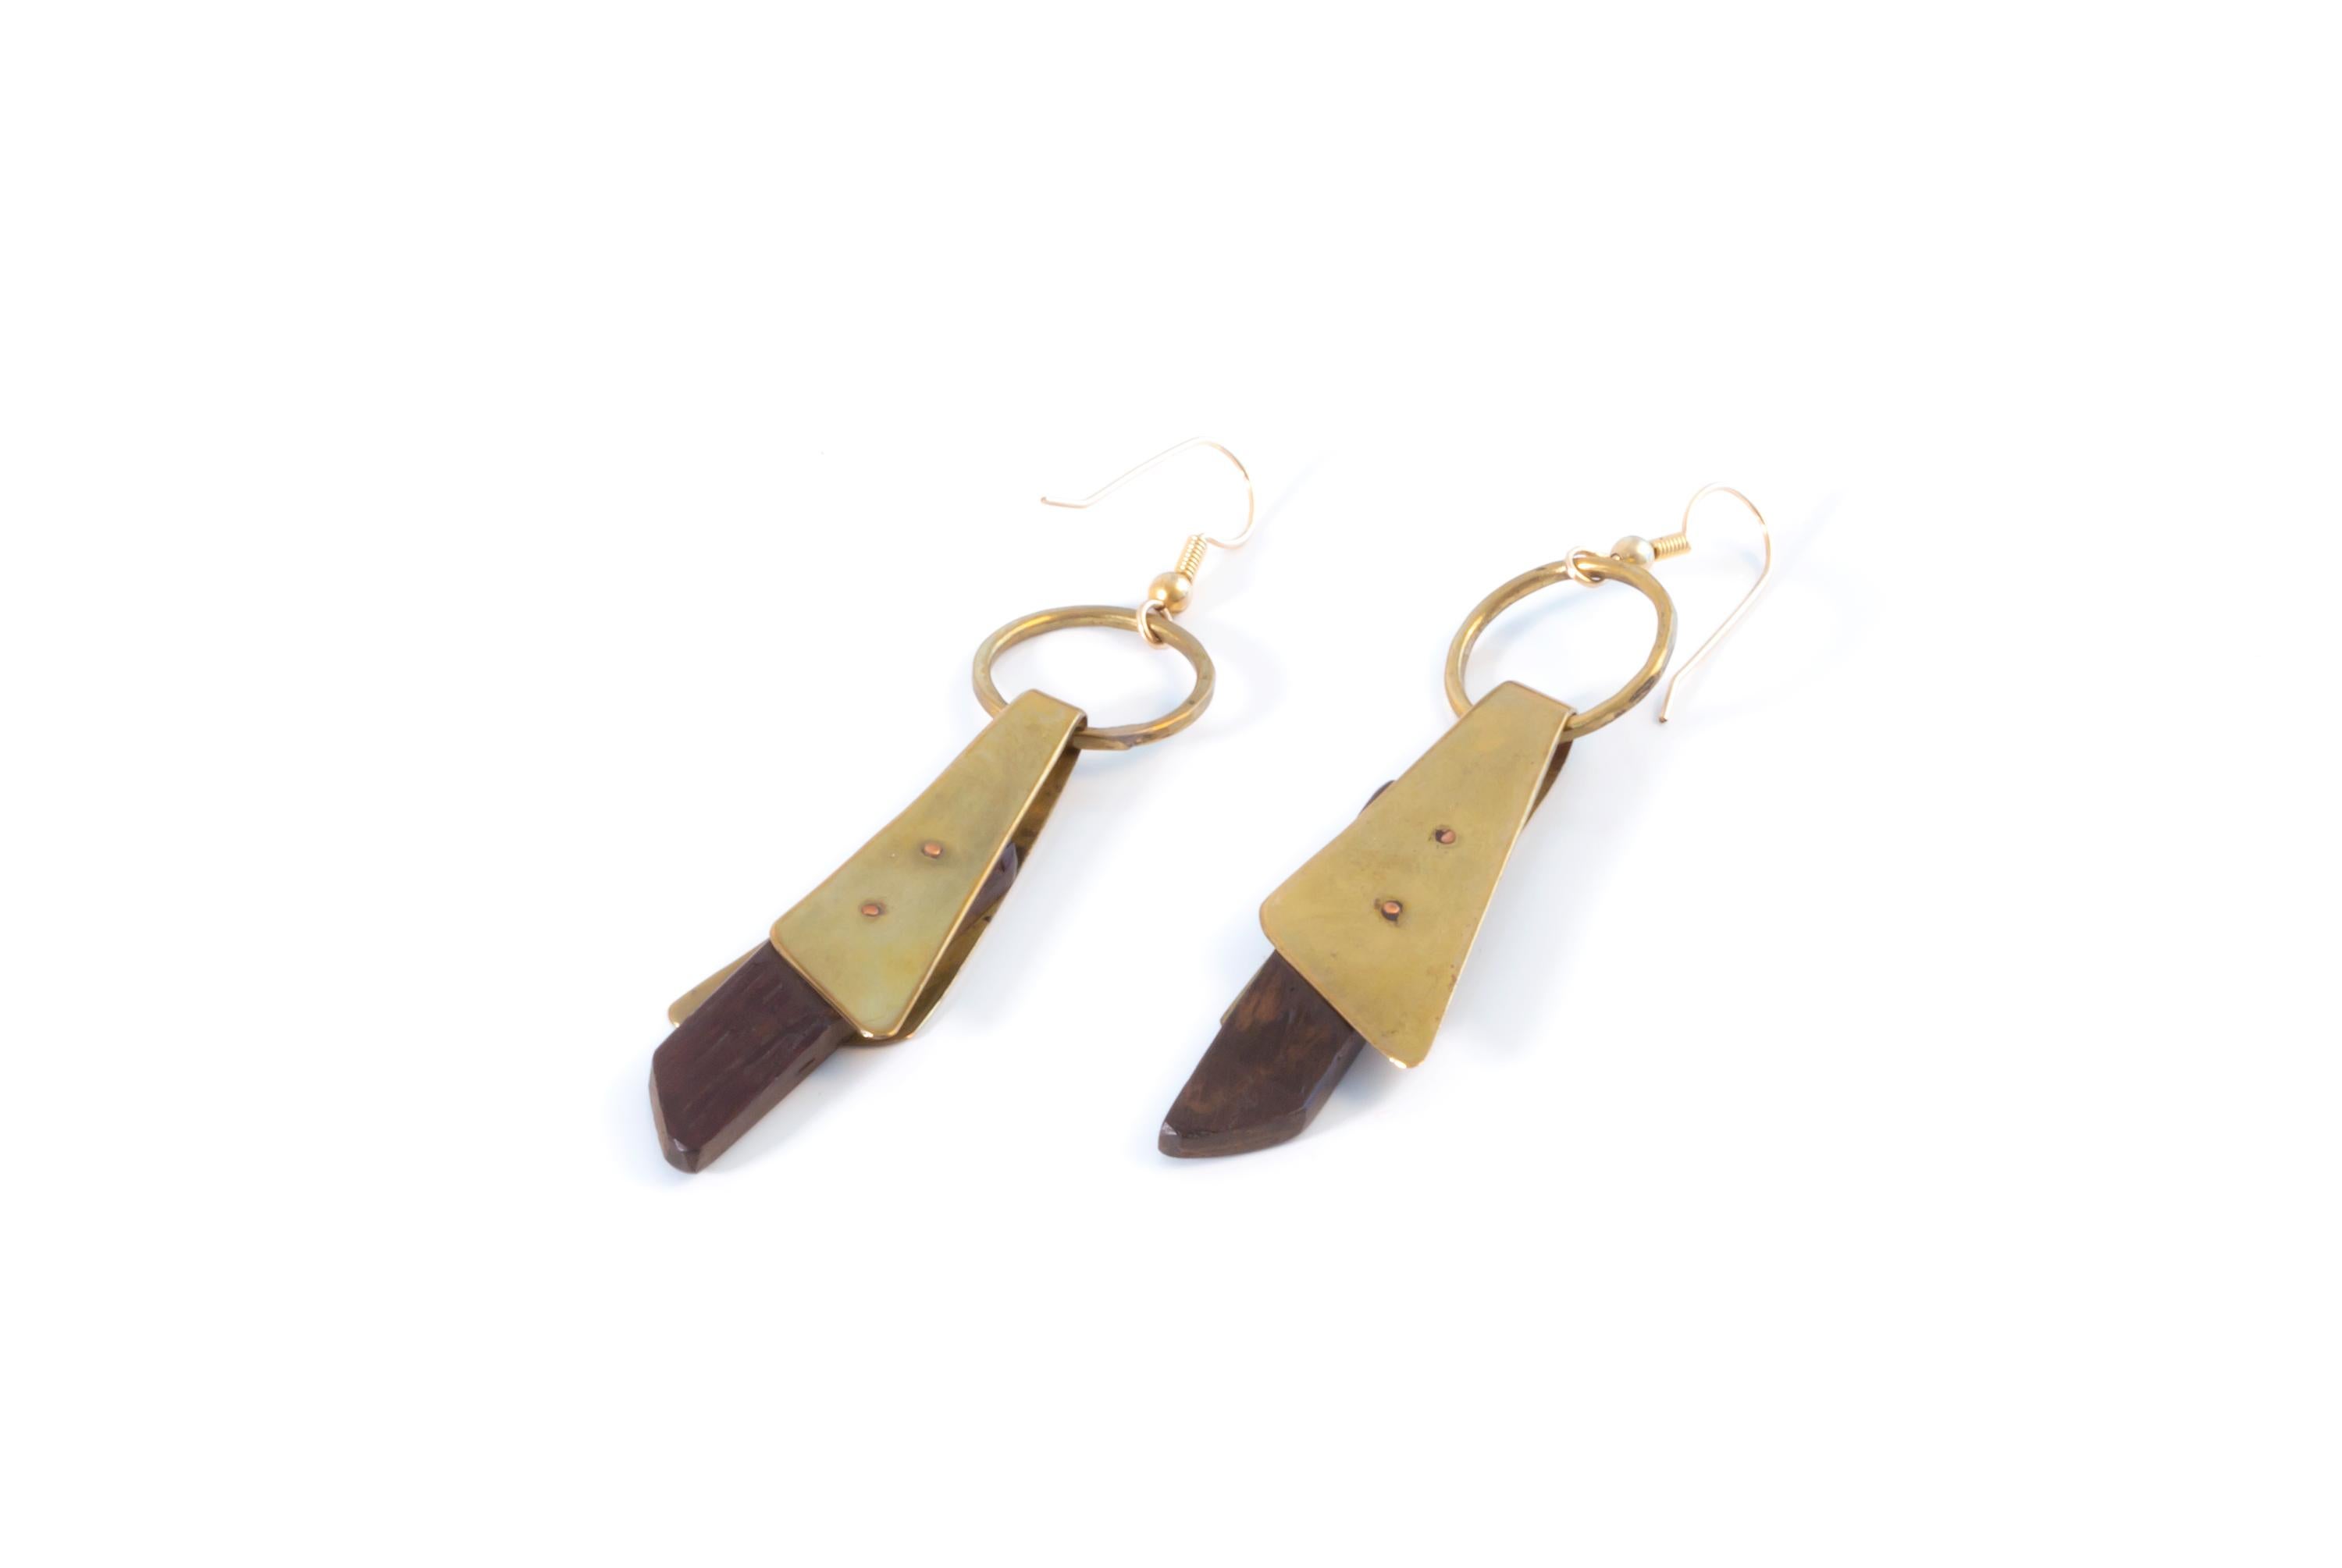 Sculptural earrings in brass and lacquered oak. Custom made in her studio as a one off pair by Anna Greta Eker, ca 1970 first half. Both earrings are in very good vintage condition, with no imperfections.